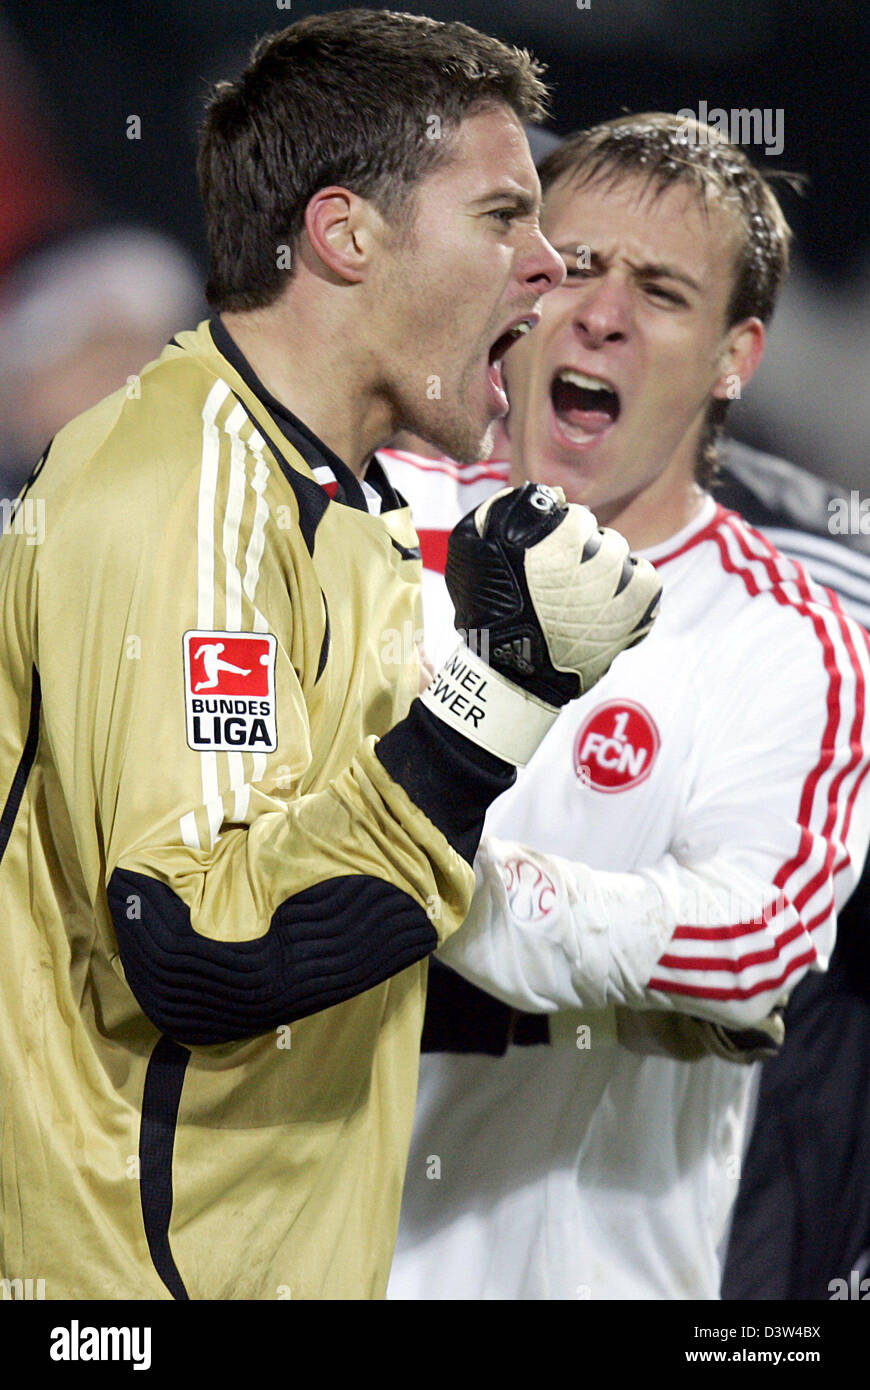 1.FC Nuremberg's goalkeeper Daniel Klewer (L) celebrates together with his teammate Dominik Reinhardt after the round of last 16 German Cup match victory over SpVgg Unterhaching at the easyCredit stadium in Nuremberg, Germany, Tuesday, 19 December 2006. Nuremberg prevailed over second-division Unterhaching on penalty kicks 2-1 after 120 minutes of goalless soccer. Photo: Frank May Stock Photo